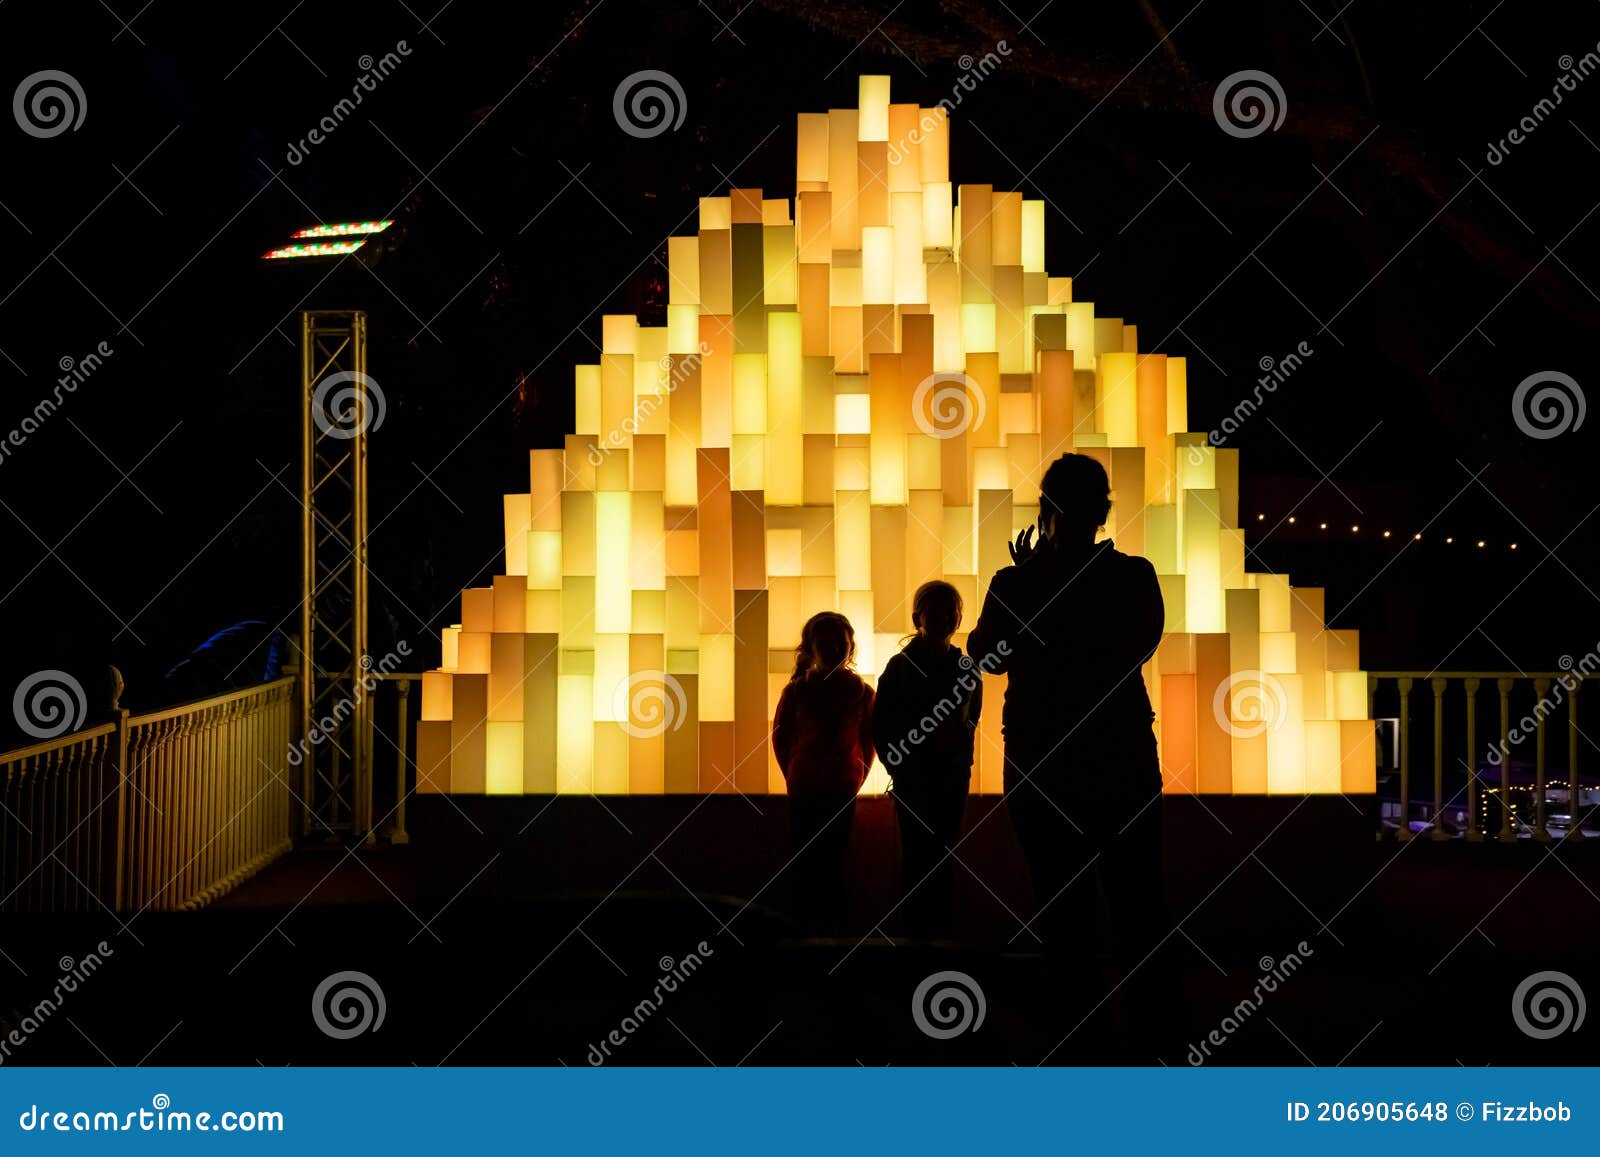 https://thumbs.dreamstime.com/z/mountain-light-designed-angus-muir-new-zealand-monolithic-installation-brought-to-life-dramatic-repertoire-lighting-206905648.jpg